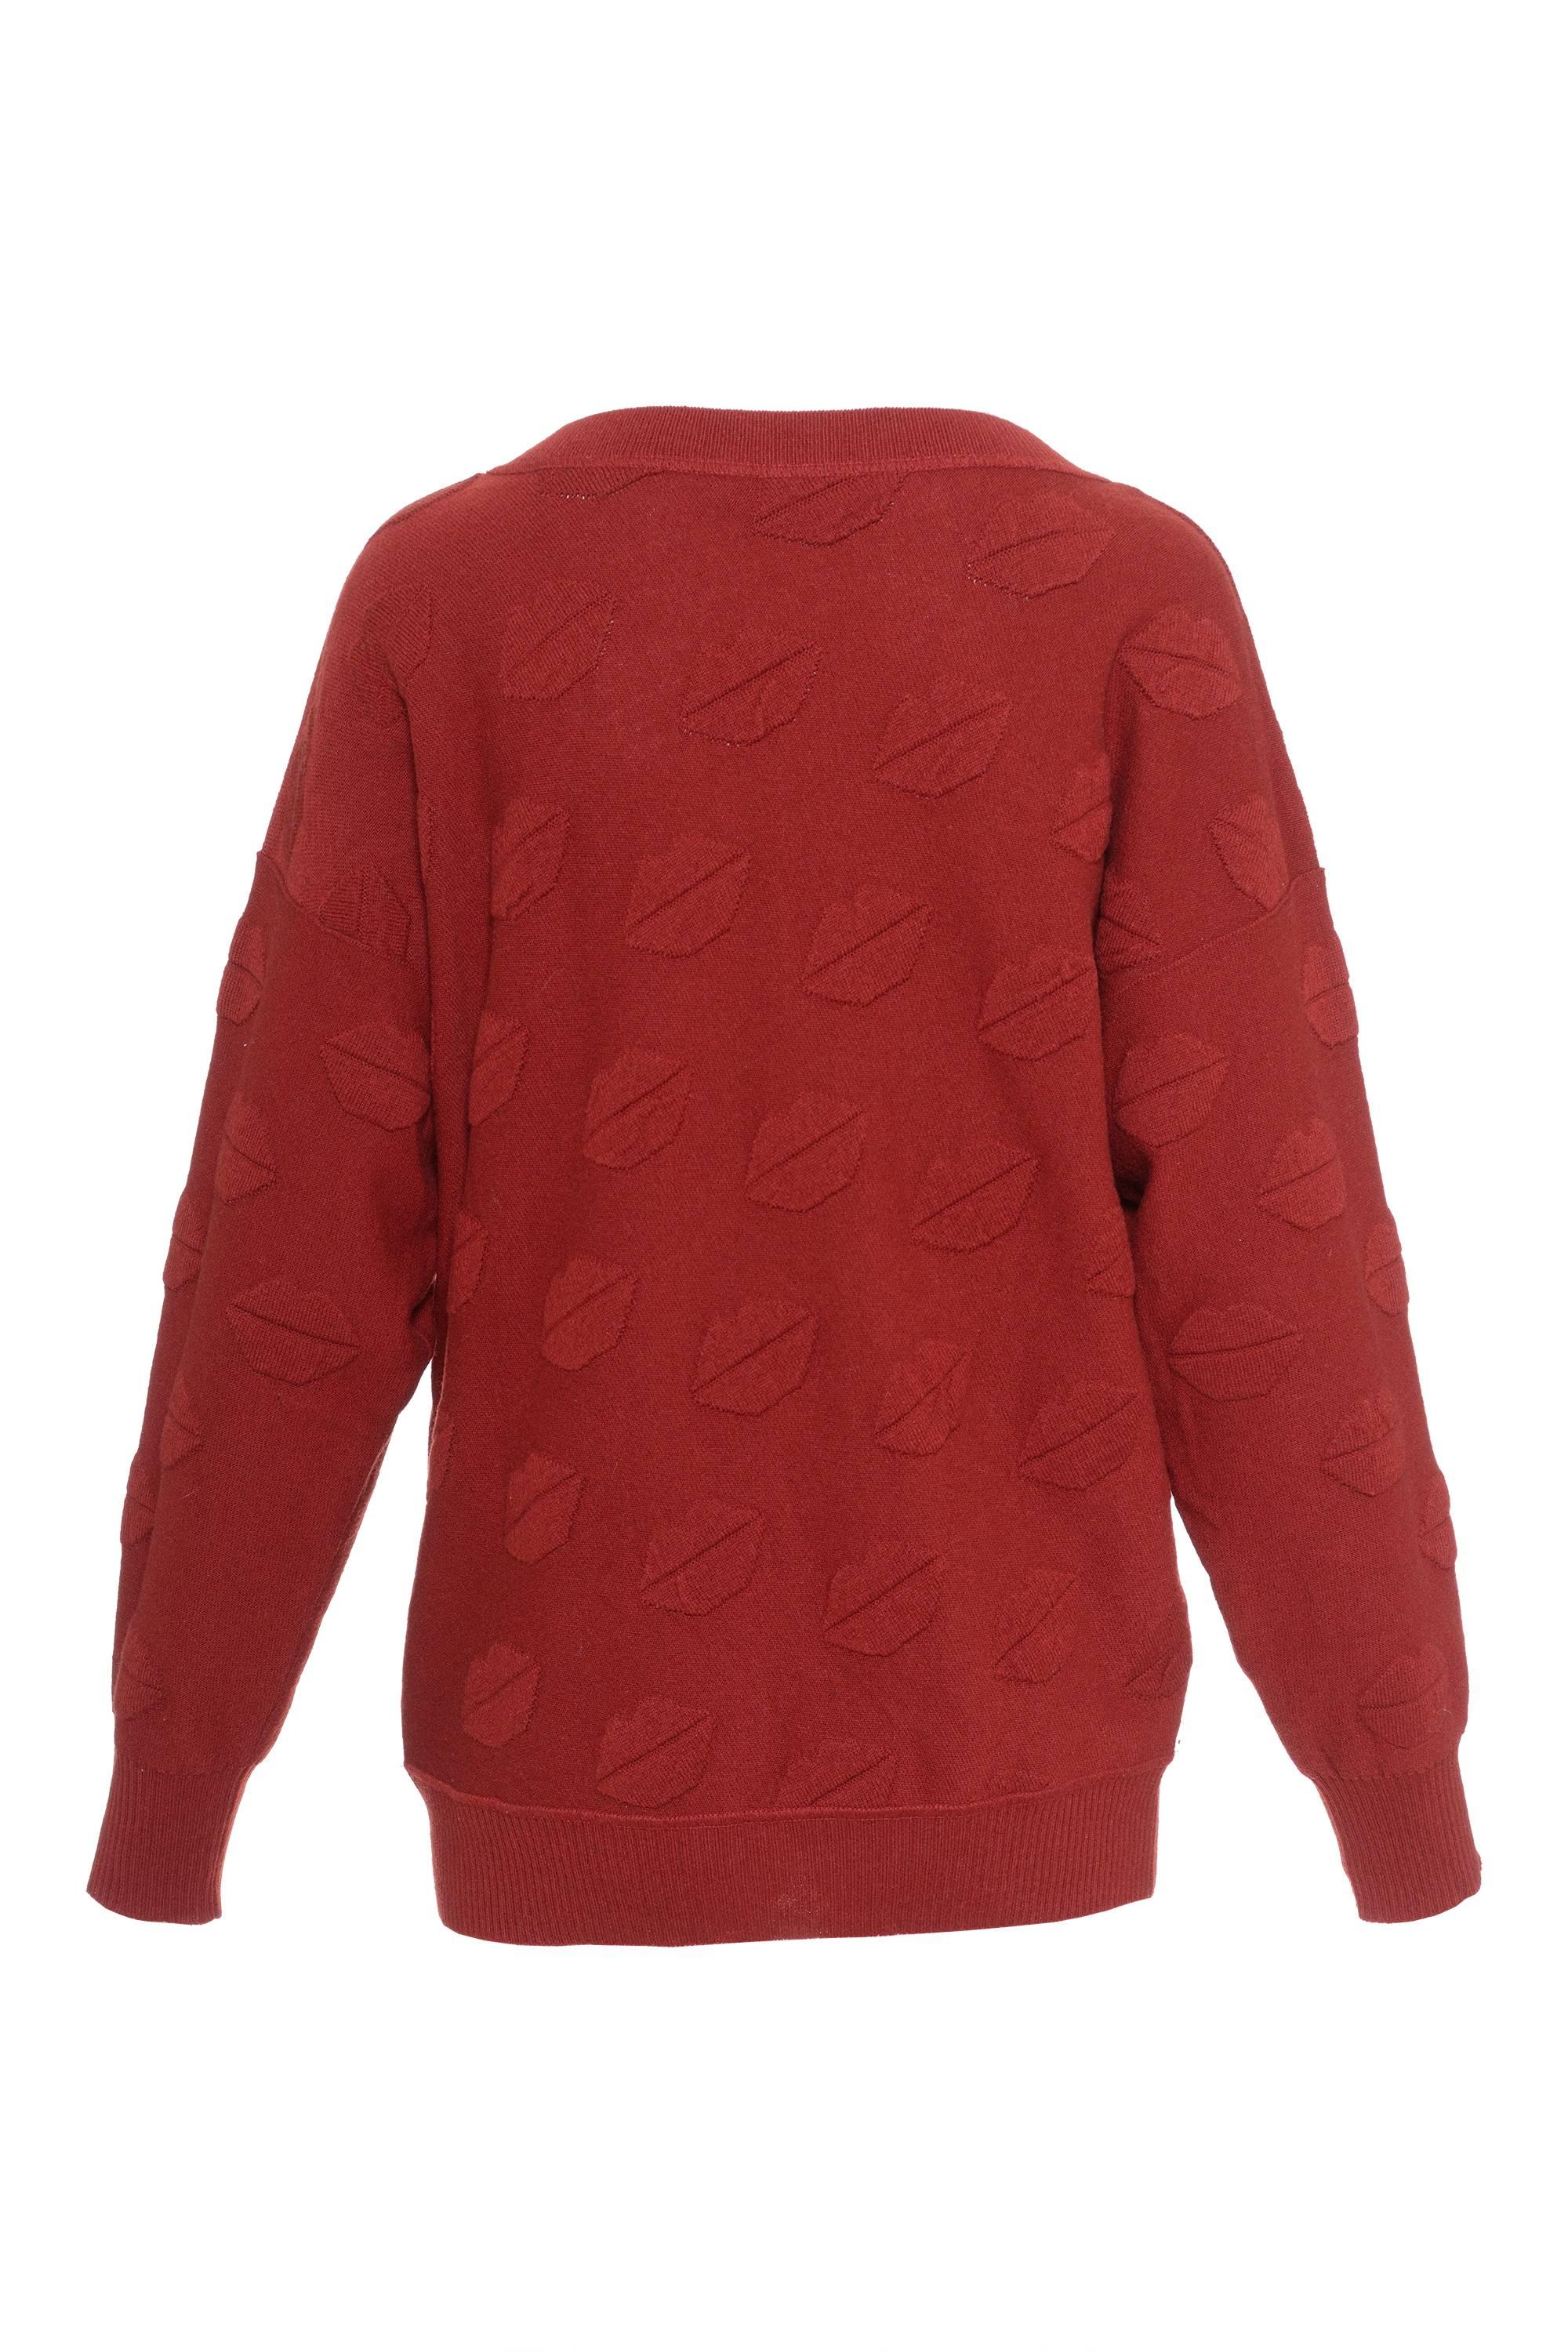 This lovely Sonia Rykiel sweater is in a maroon cashmere and wool knitted fabric with gorgeous lips texture.

Excellent condition

Label: Sonia Rykiel - Made in Italy
fabric: wool/cashmere
Color: maroon

Measurements (unstretched):
Label size